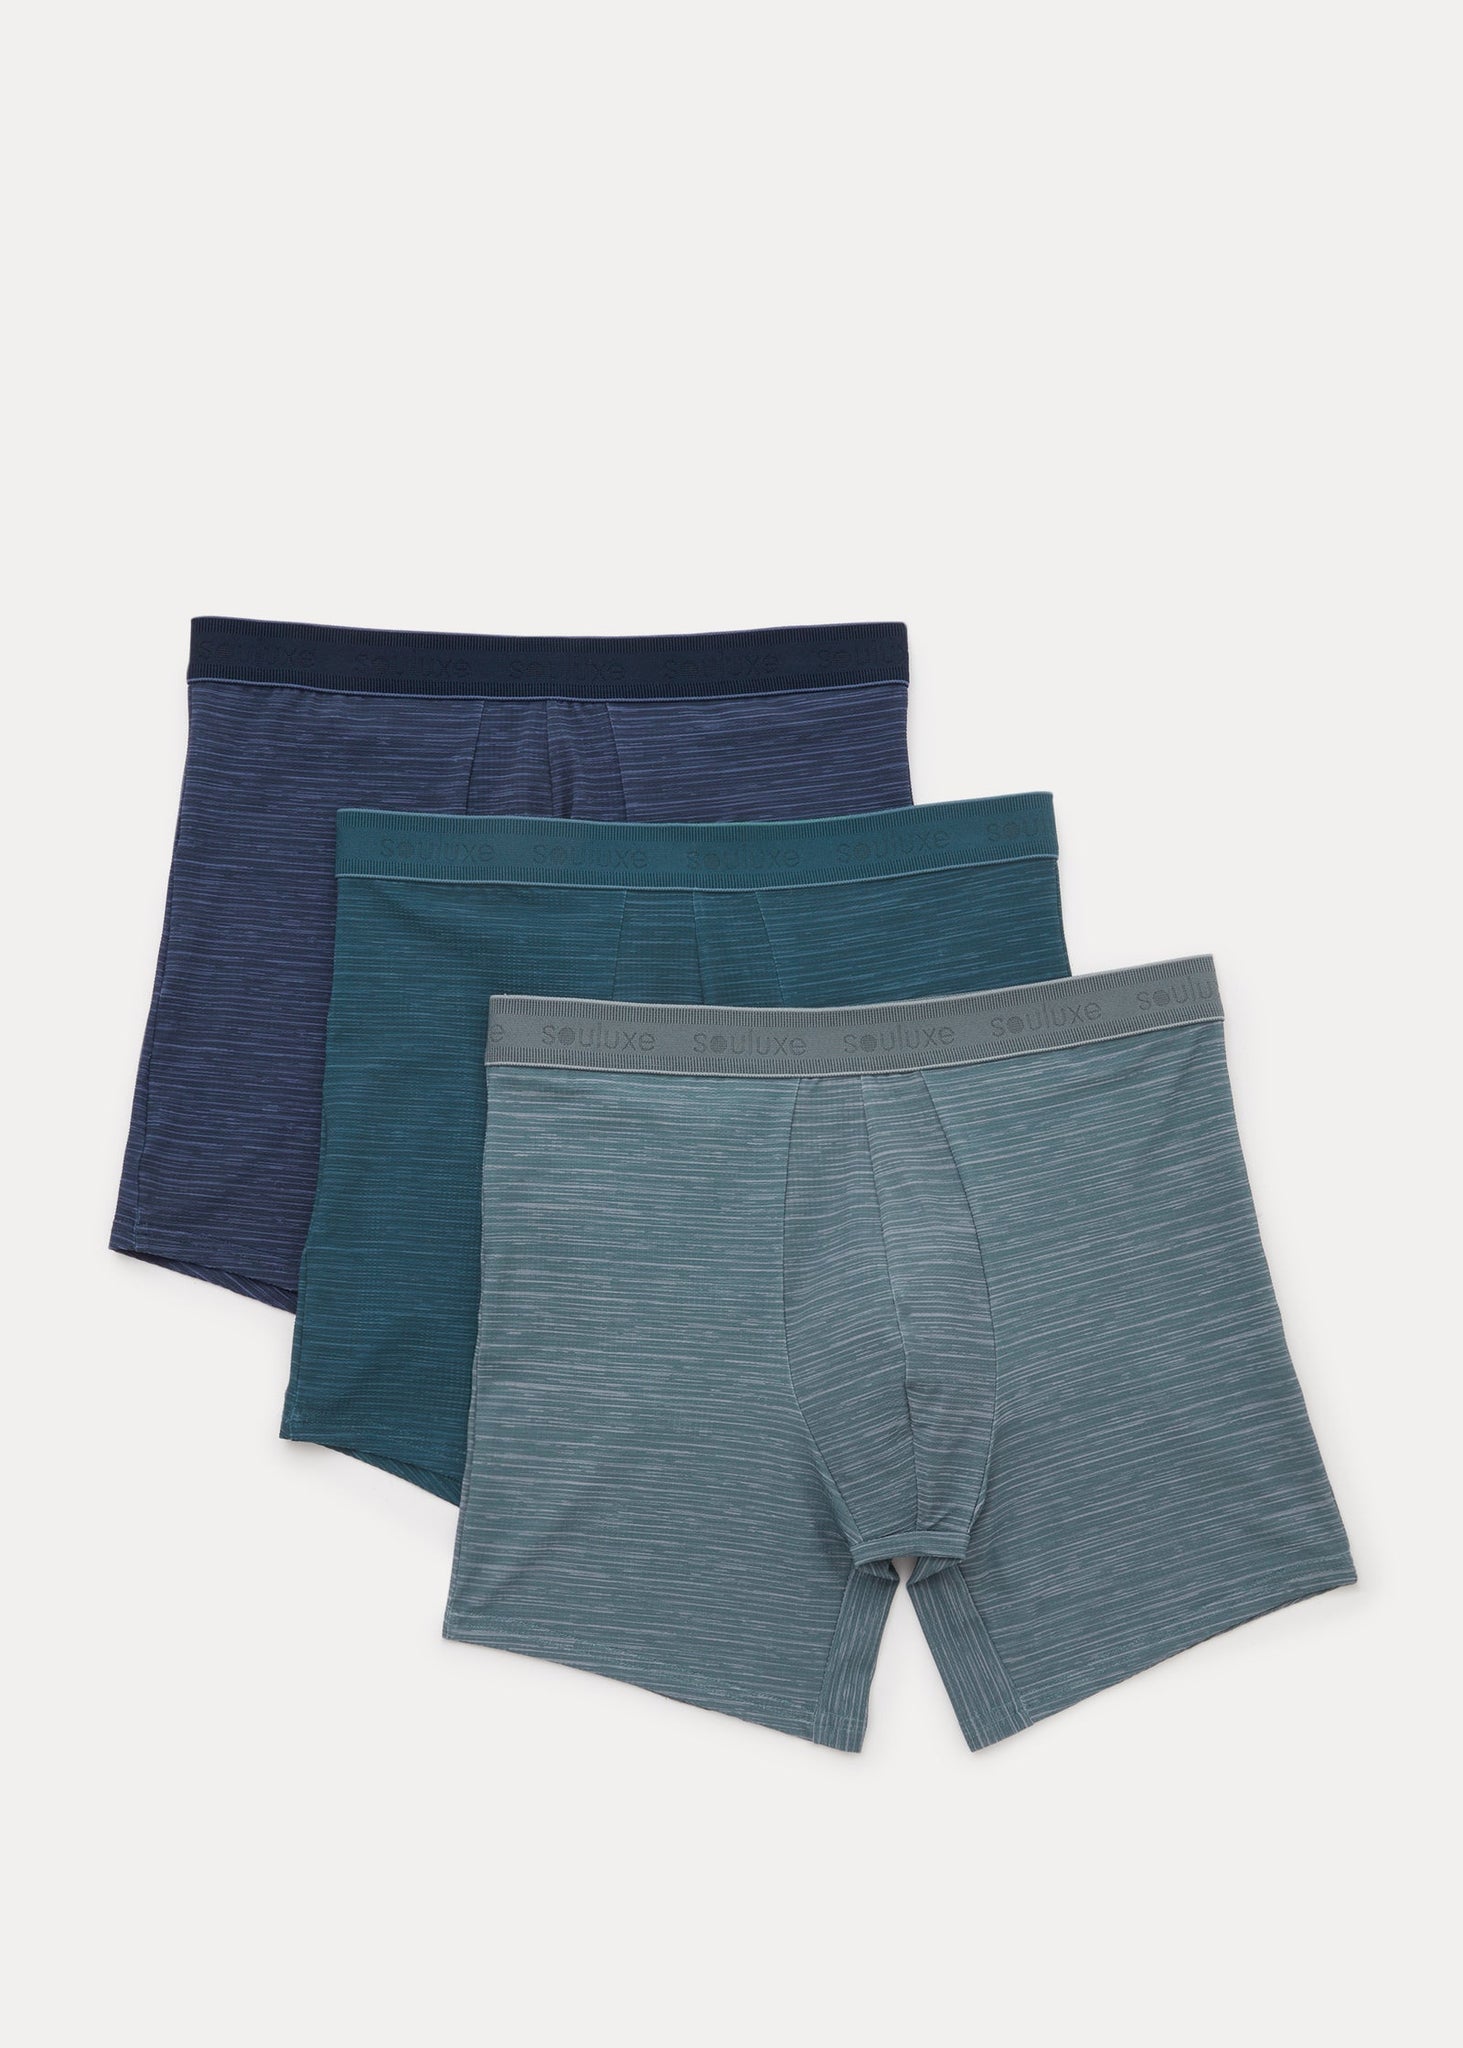 Souluxe 3 Pack Blue Marl Sports Boxers  M212362